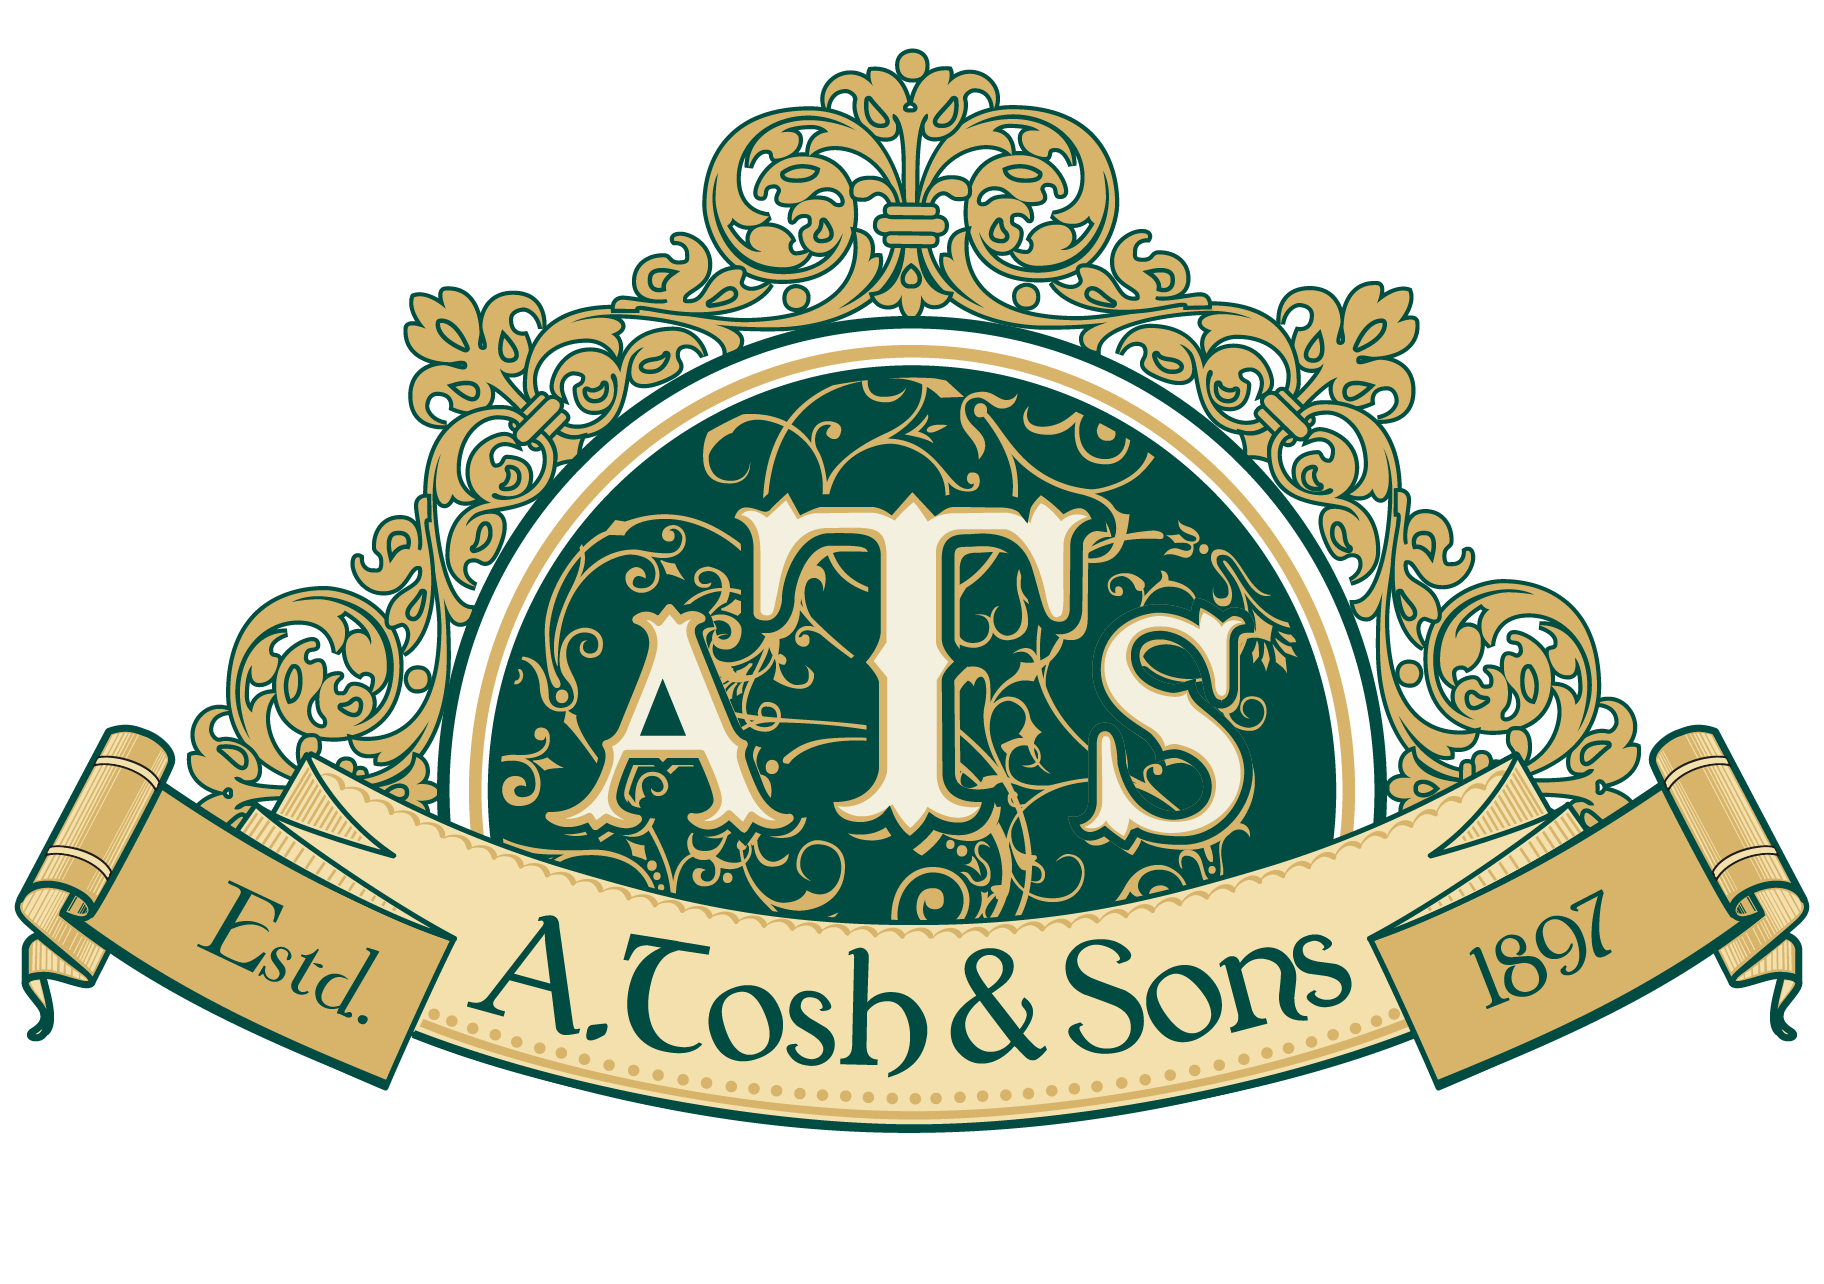 A. Tosh & Sons - Leading Tea Manufacturer